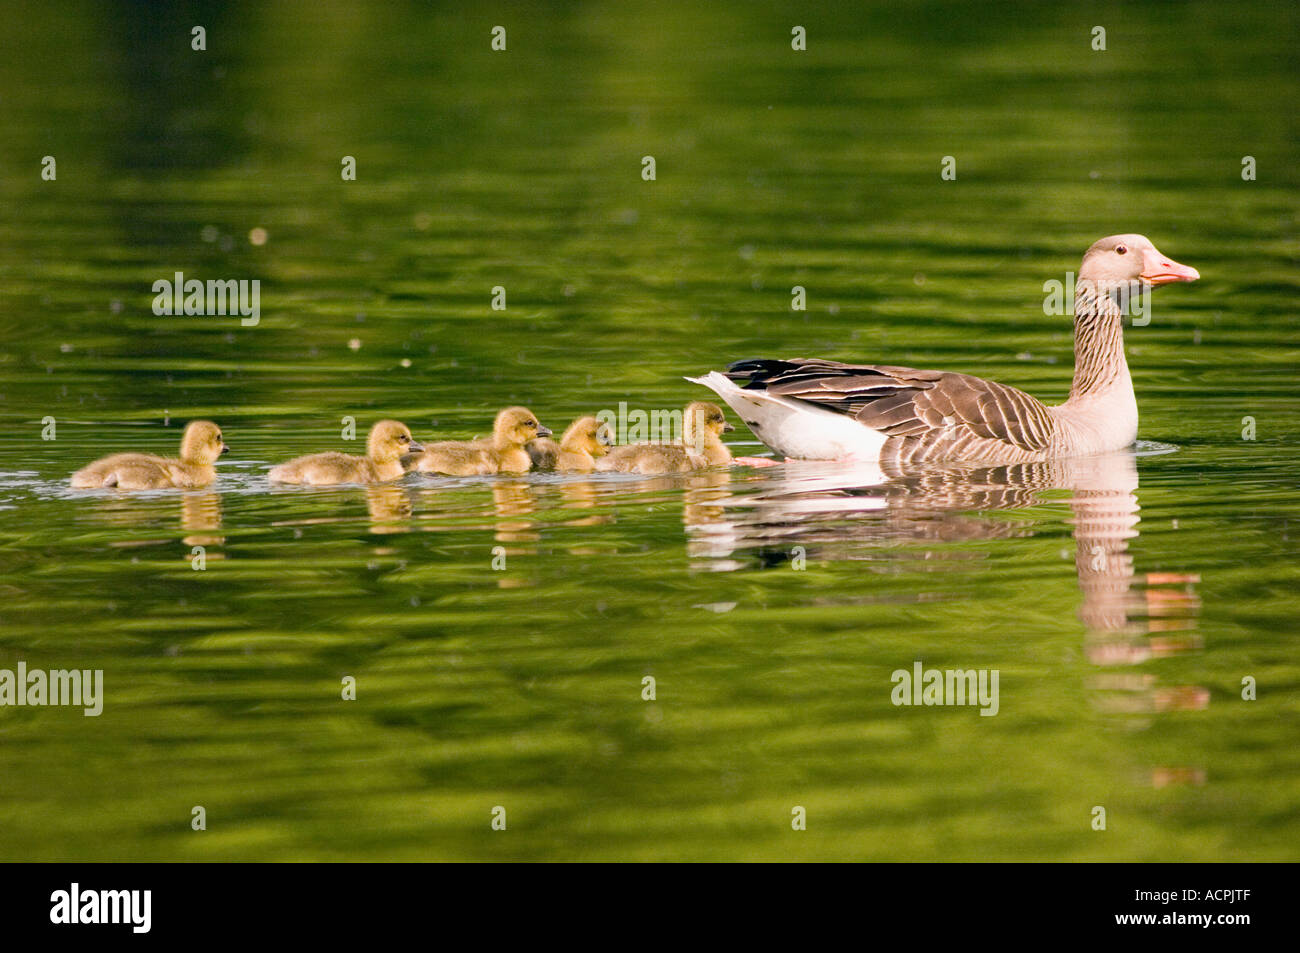 Graue Gans mit Pouts in See Stockfoto